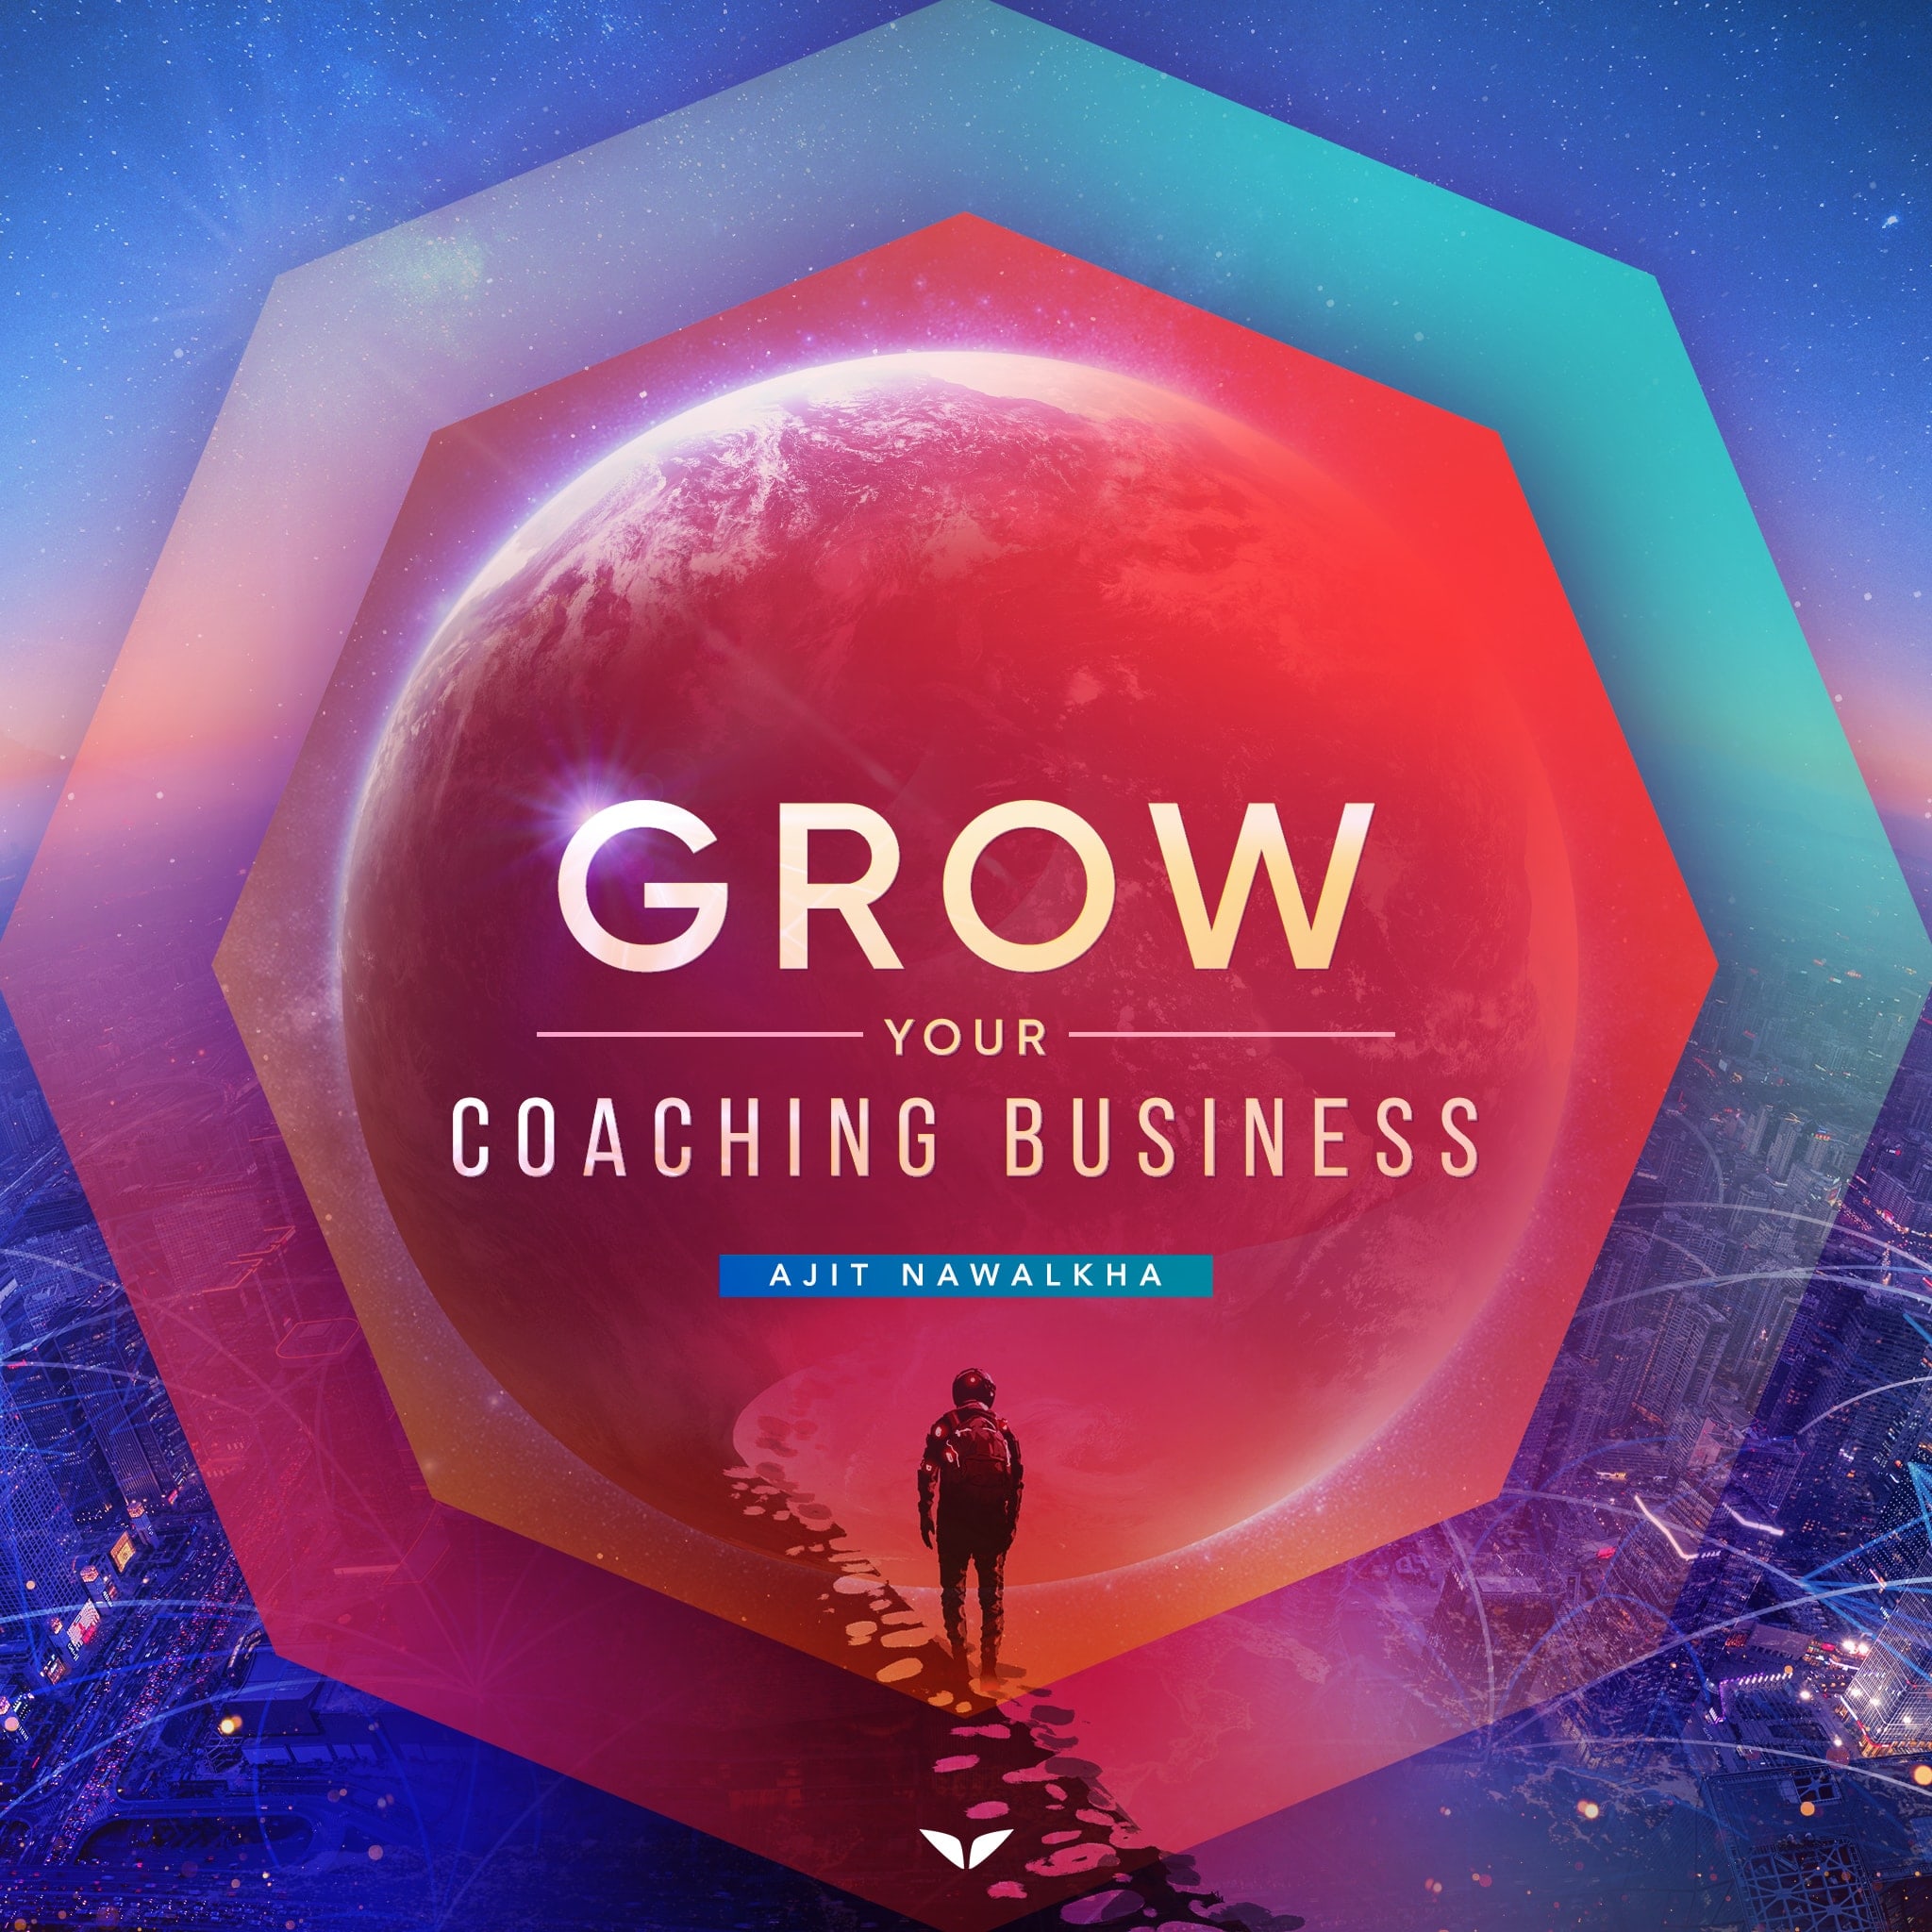 Grow Your Coaching Business To The Next Level with Ajit Nawalkha